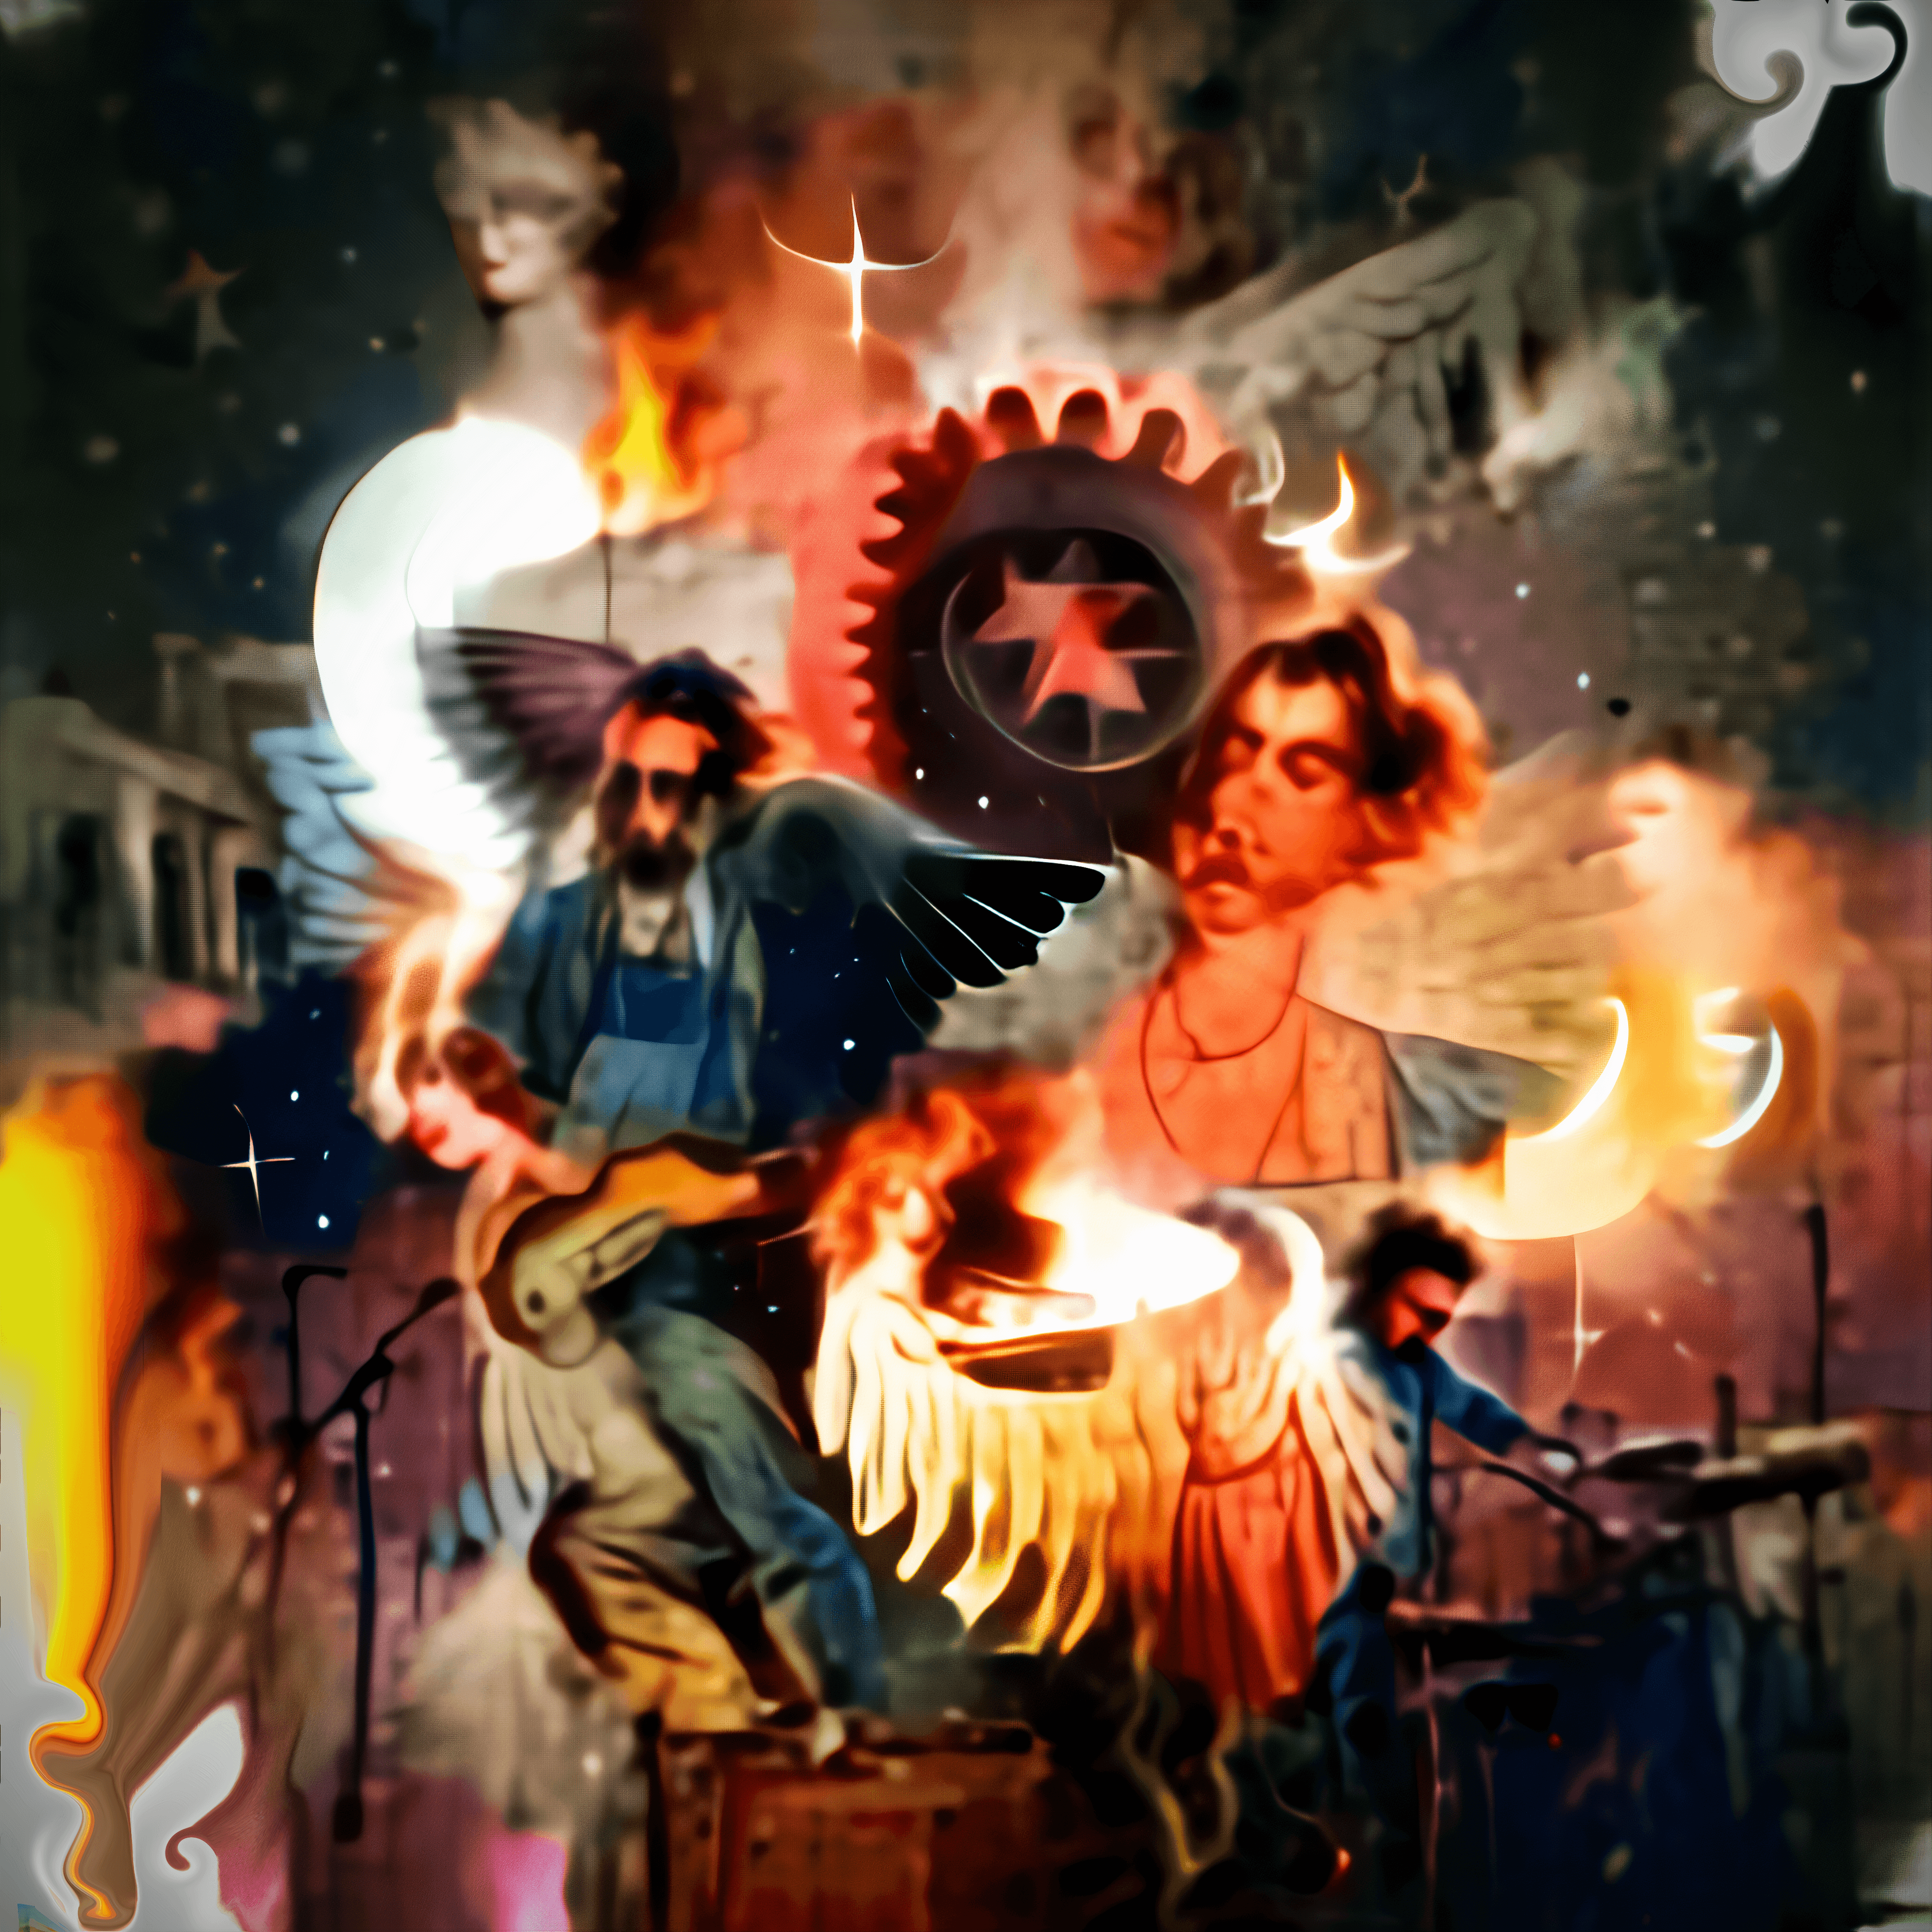 Angel-headed Hipsters